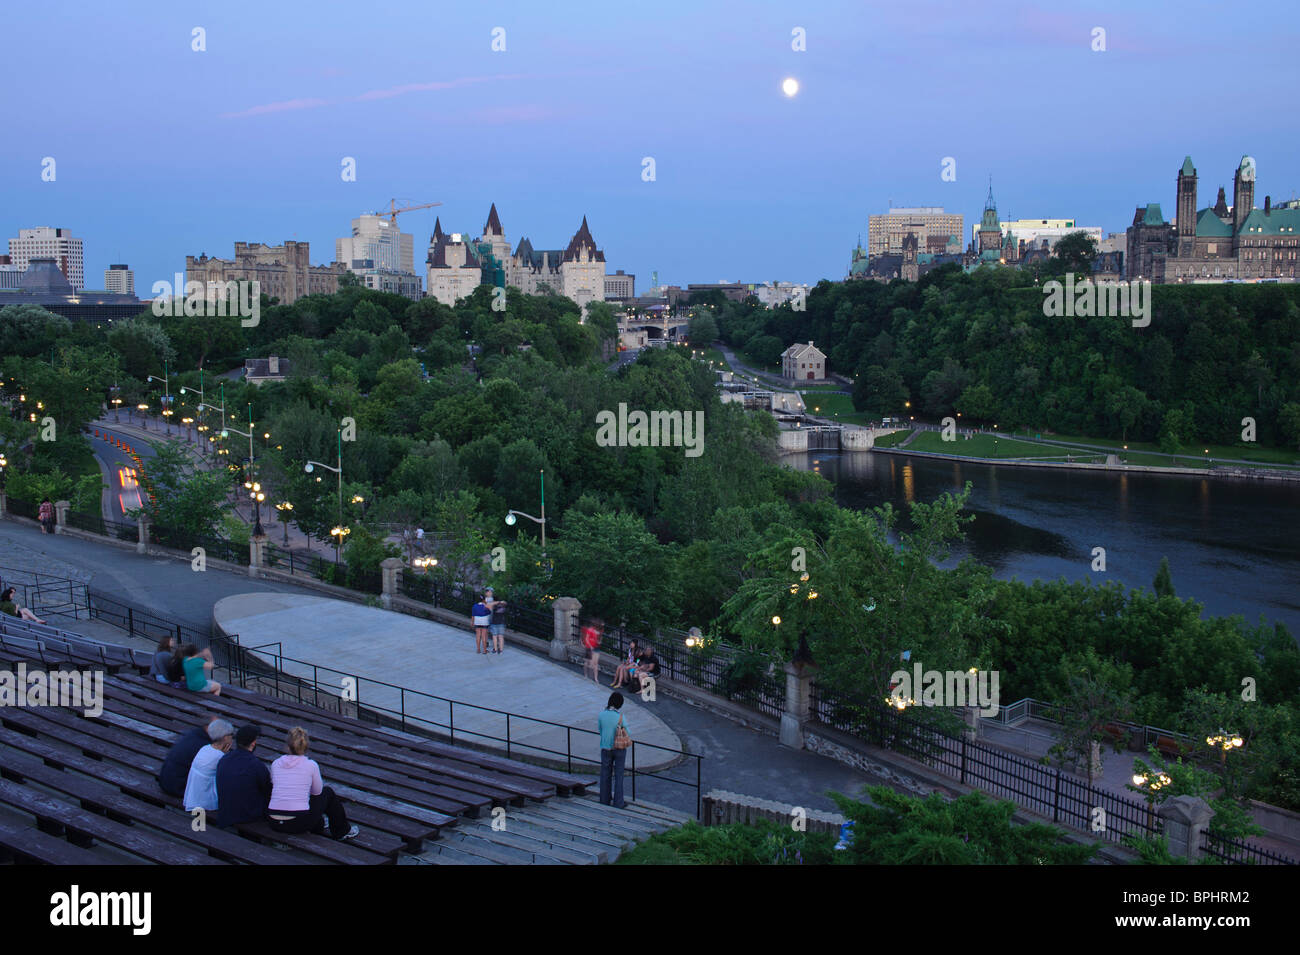 People at Astrolabe Theatre at Nepean Point, Chateau Laurier, Rideau Canal Locks, Bytown Museum, Parliament Hill and Ottawa River at dusk, Nepean Point Ottawa Ontario Canada Stock Photo